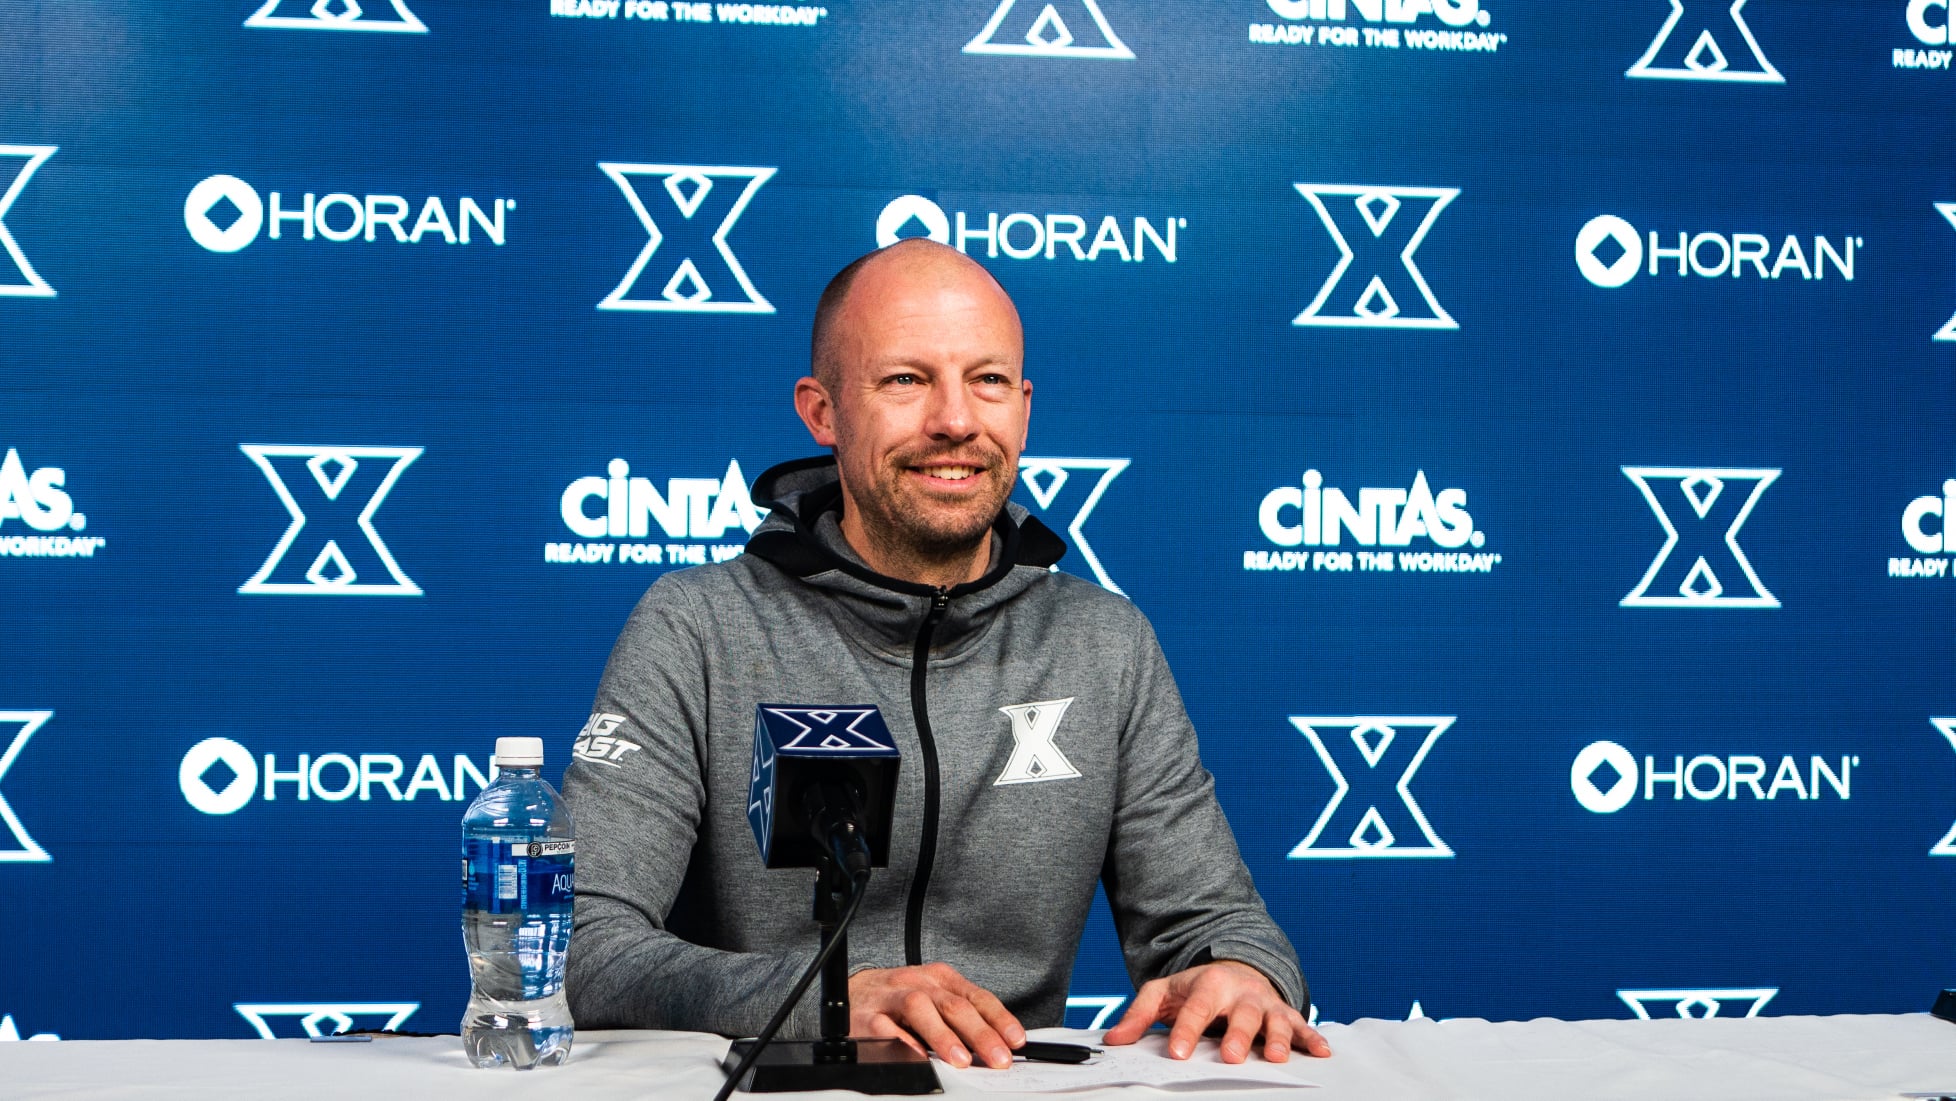 Xavier men's soccer head coach Andy Fleming departs after 12 seasons -  SoccerWire